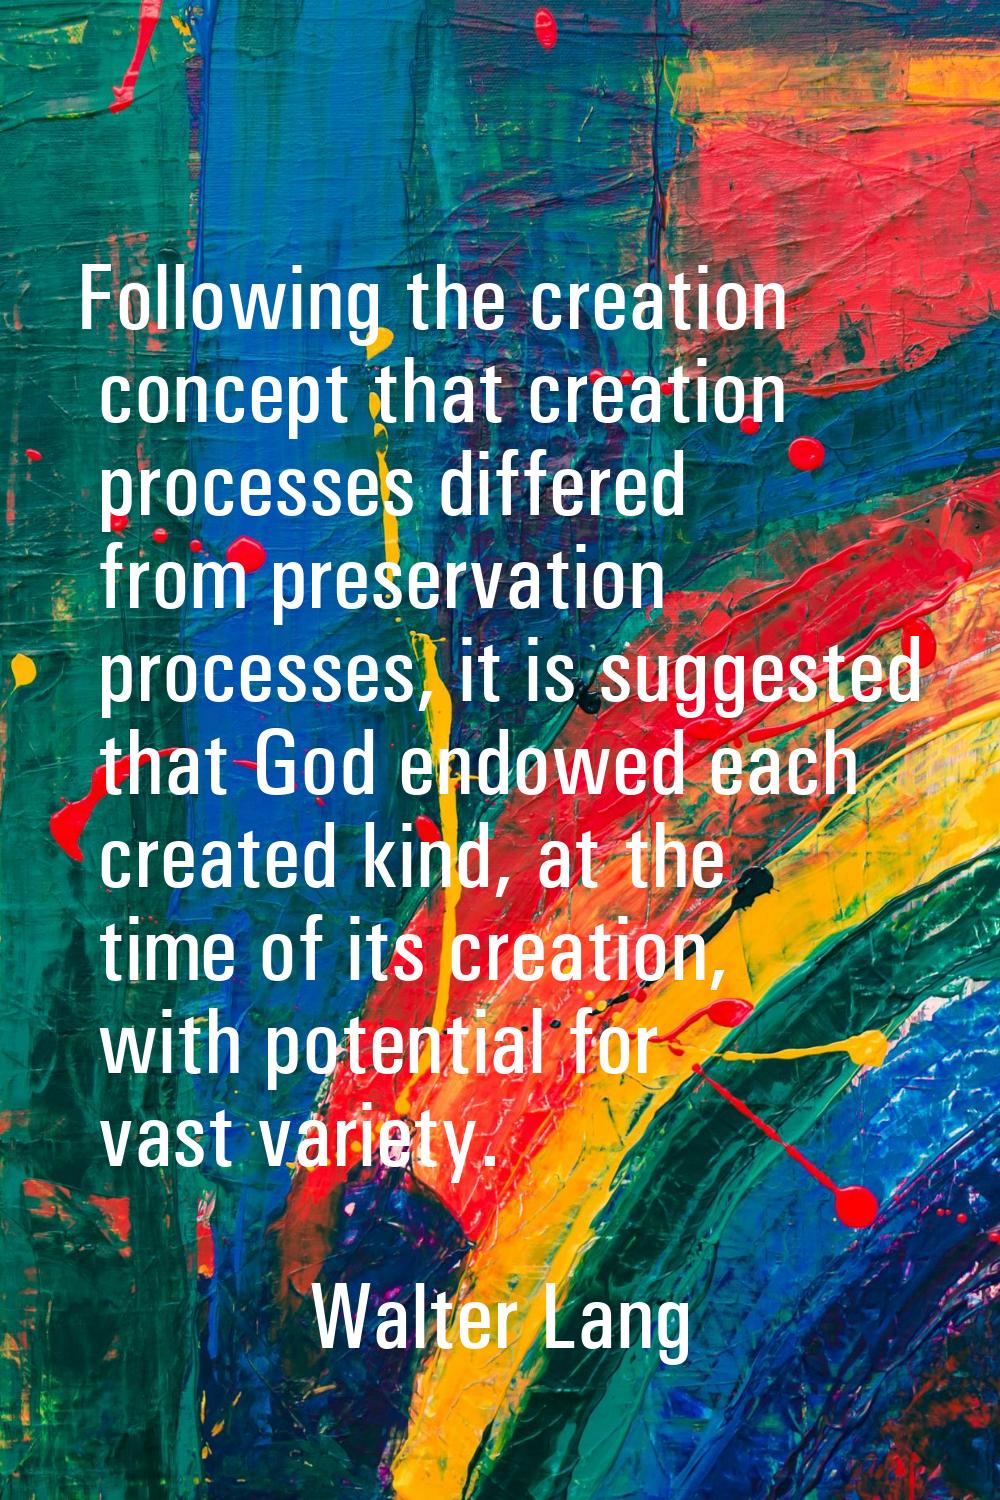 Following the creation concept that creation processes differed from preservation processes, it is 